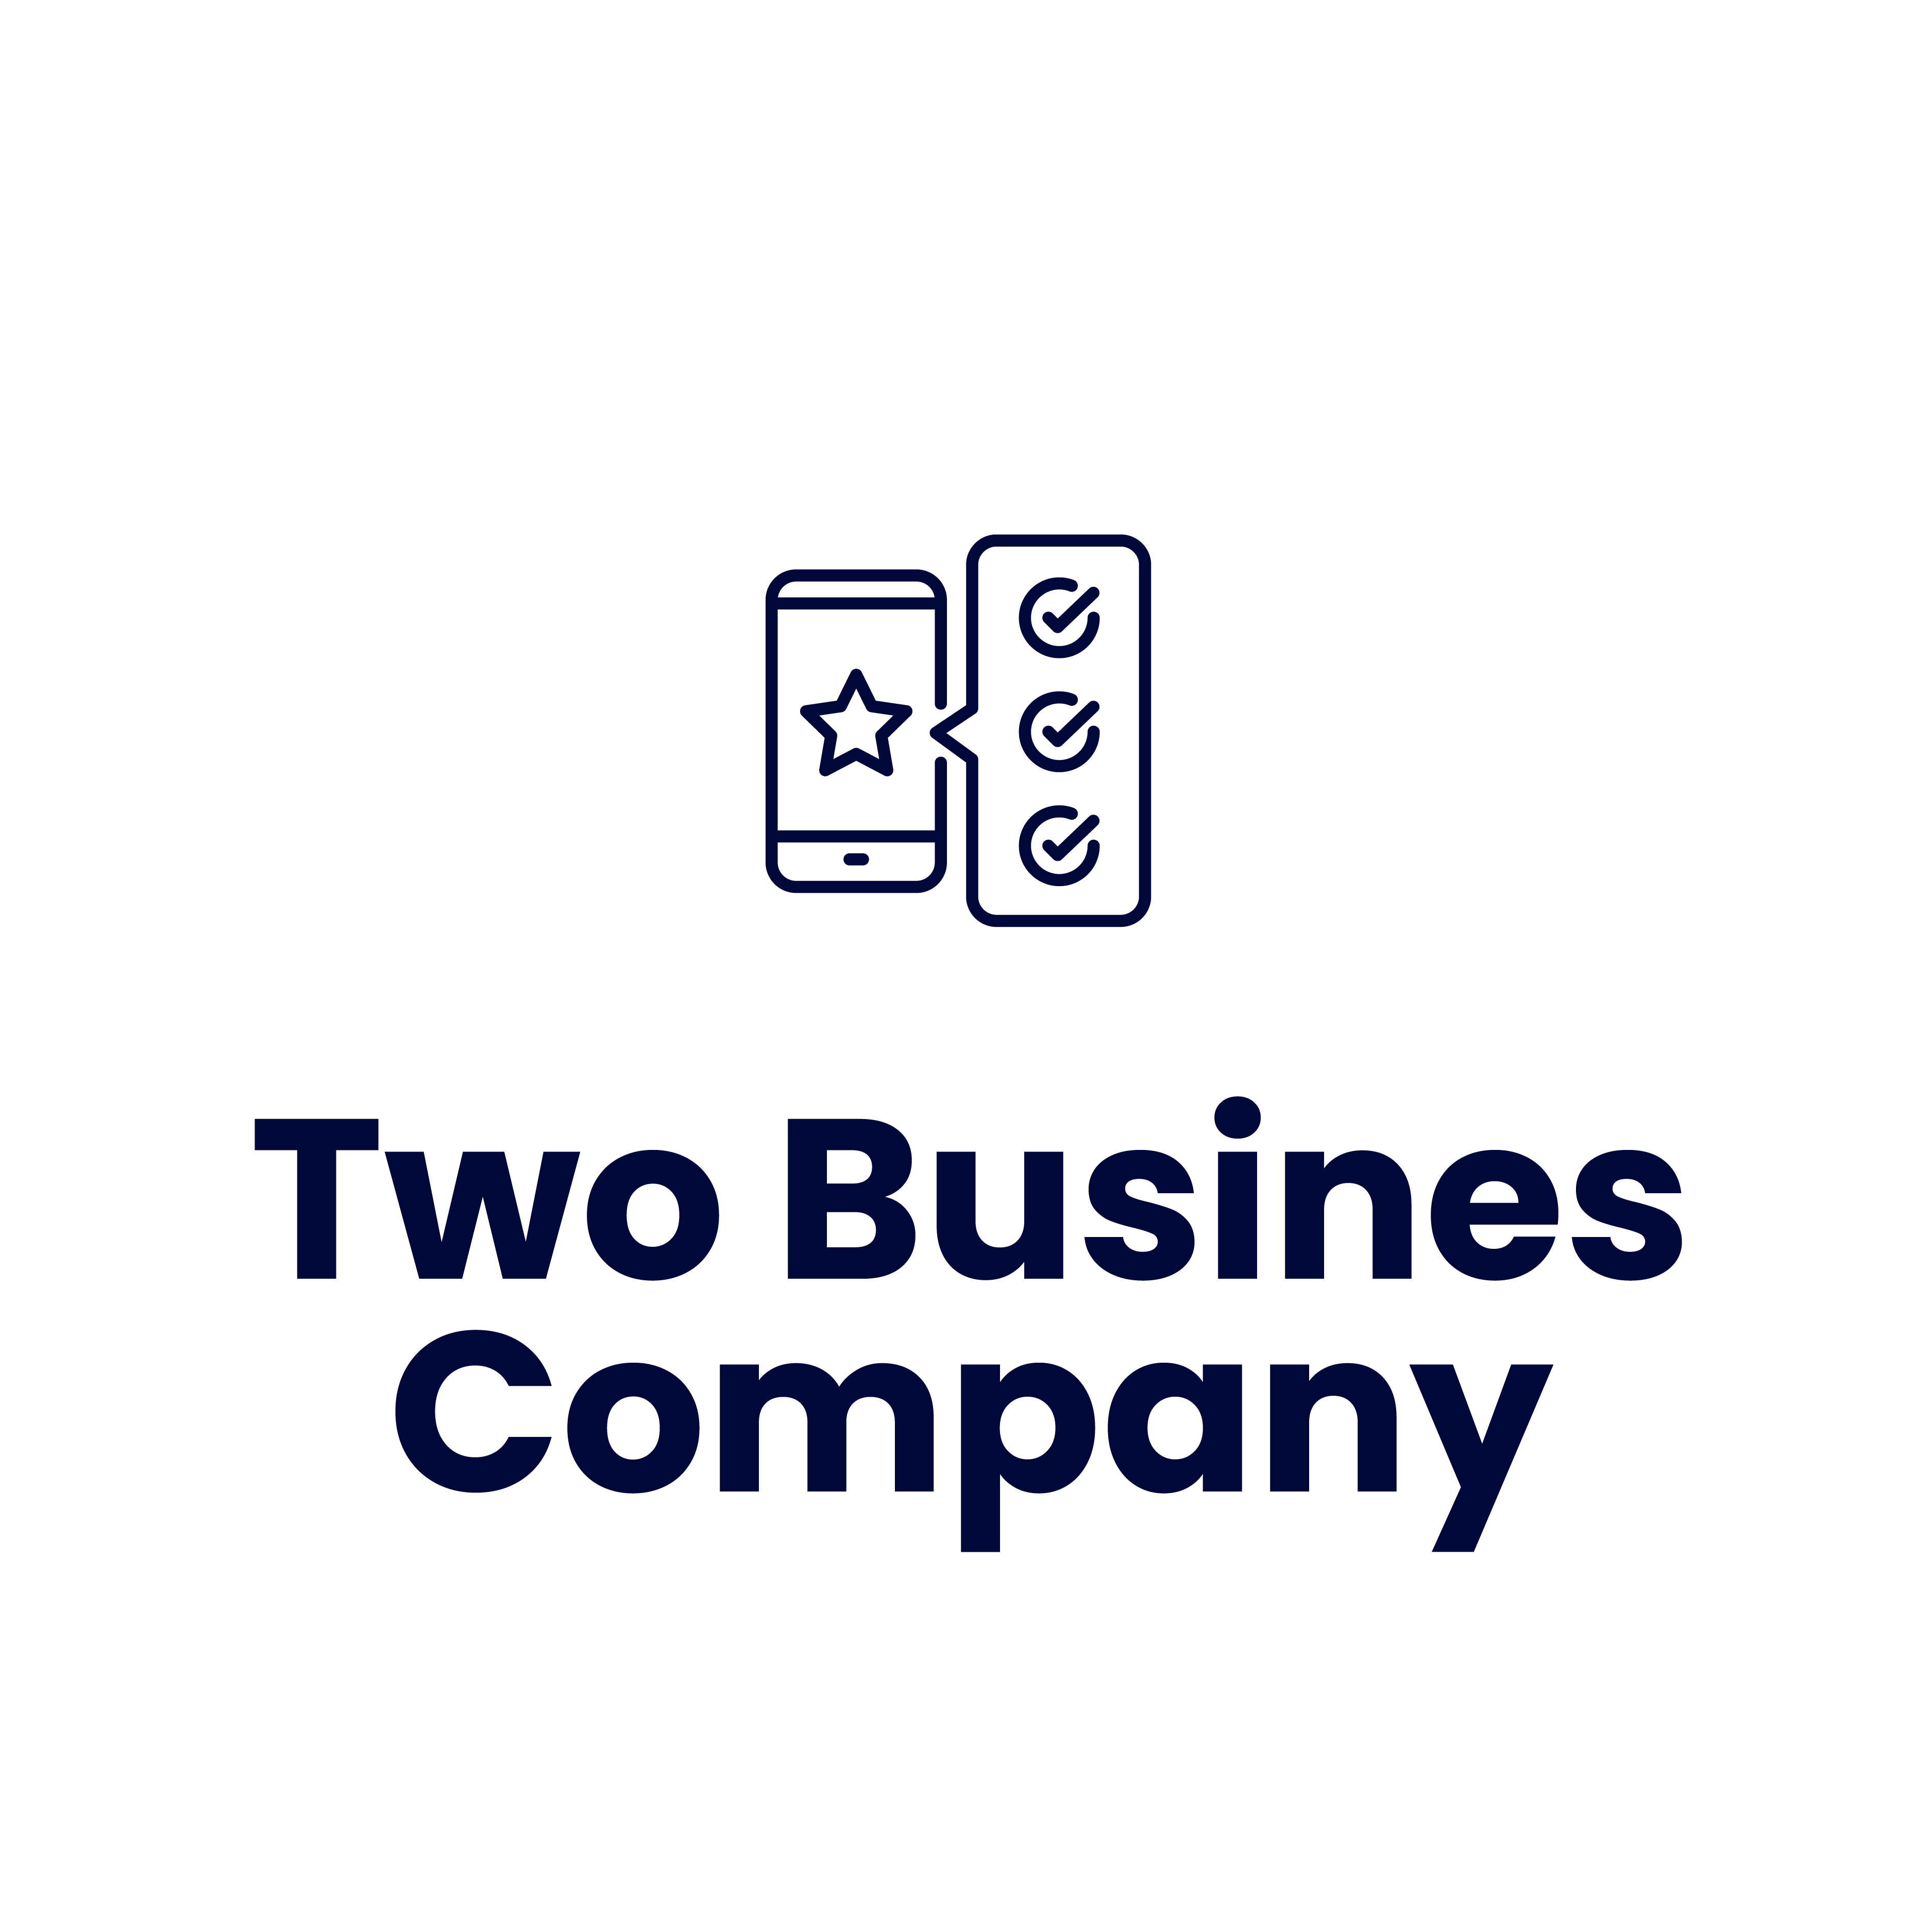 Two Business Company